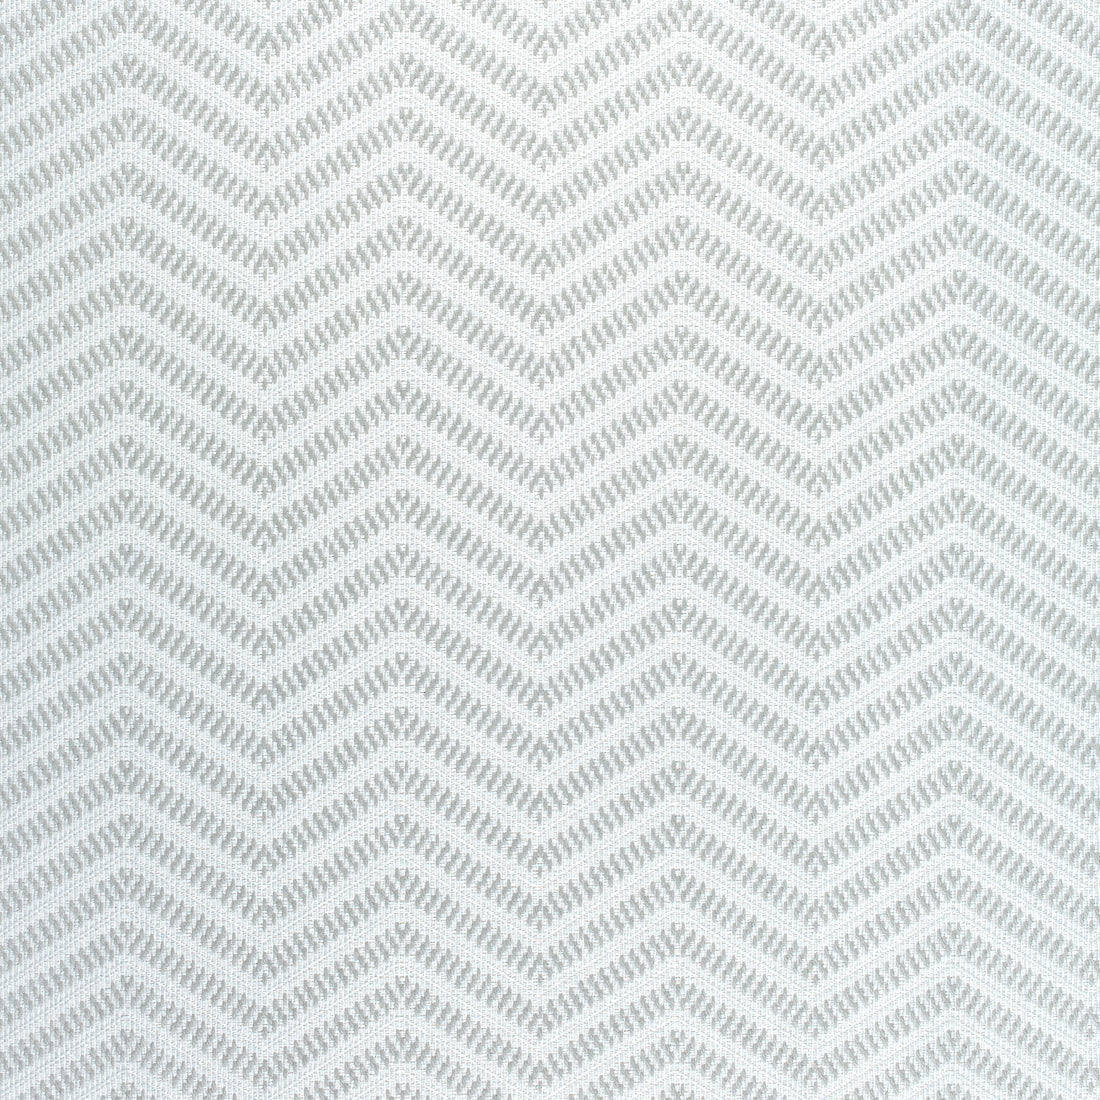 Matari Chevron fabric in sterling grey color - pattern number W80630 - by Thibaut in the Pinnacle collection